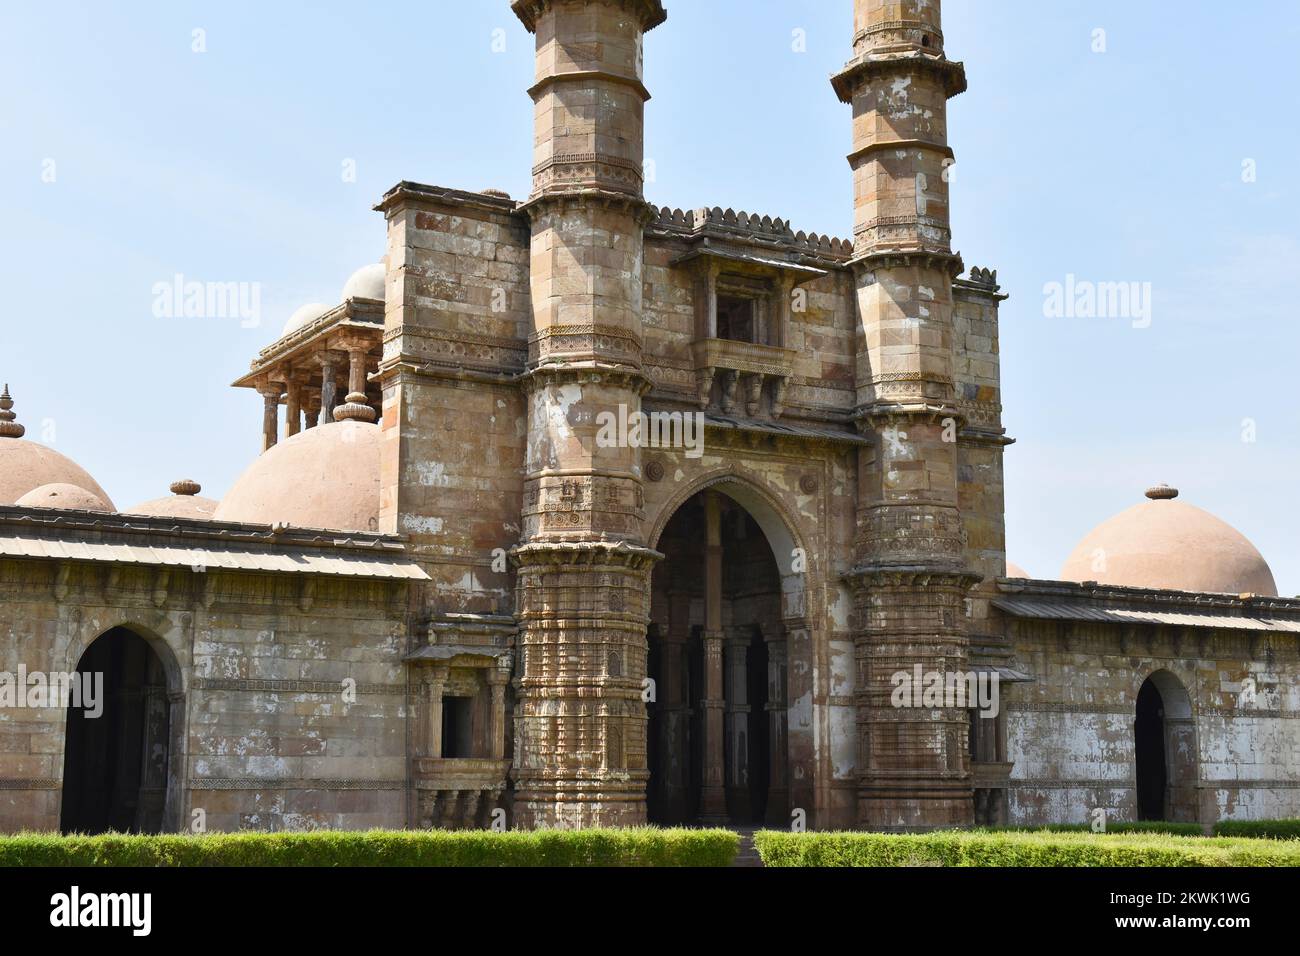 Jami Masjid with intricate carvings in stone, front Close up, an Islamic monuments was built by Sultan Mahmud Begada in 1509, Champaner-Pavagadh Archa Stock Photo